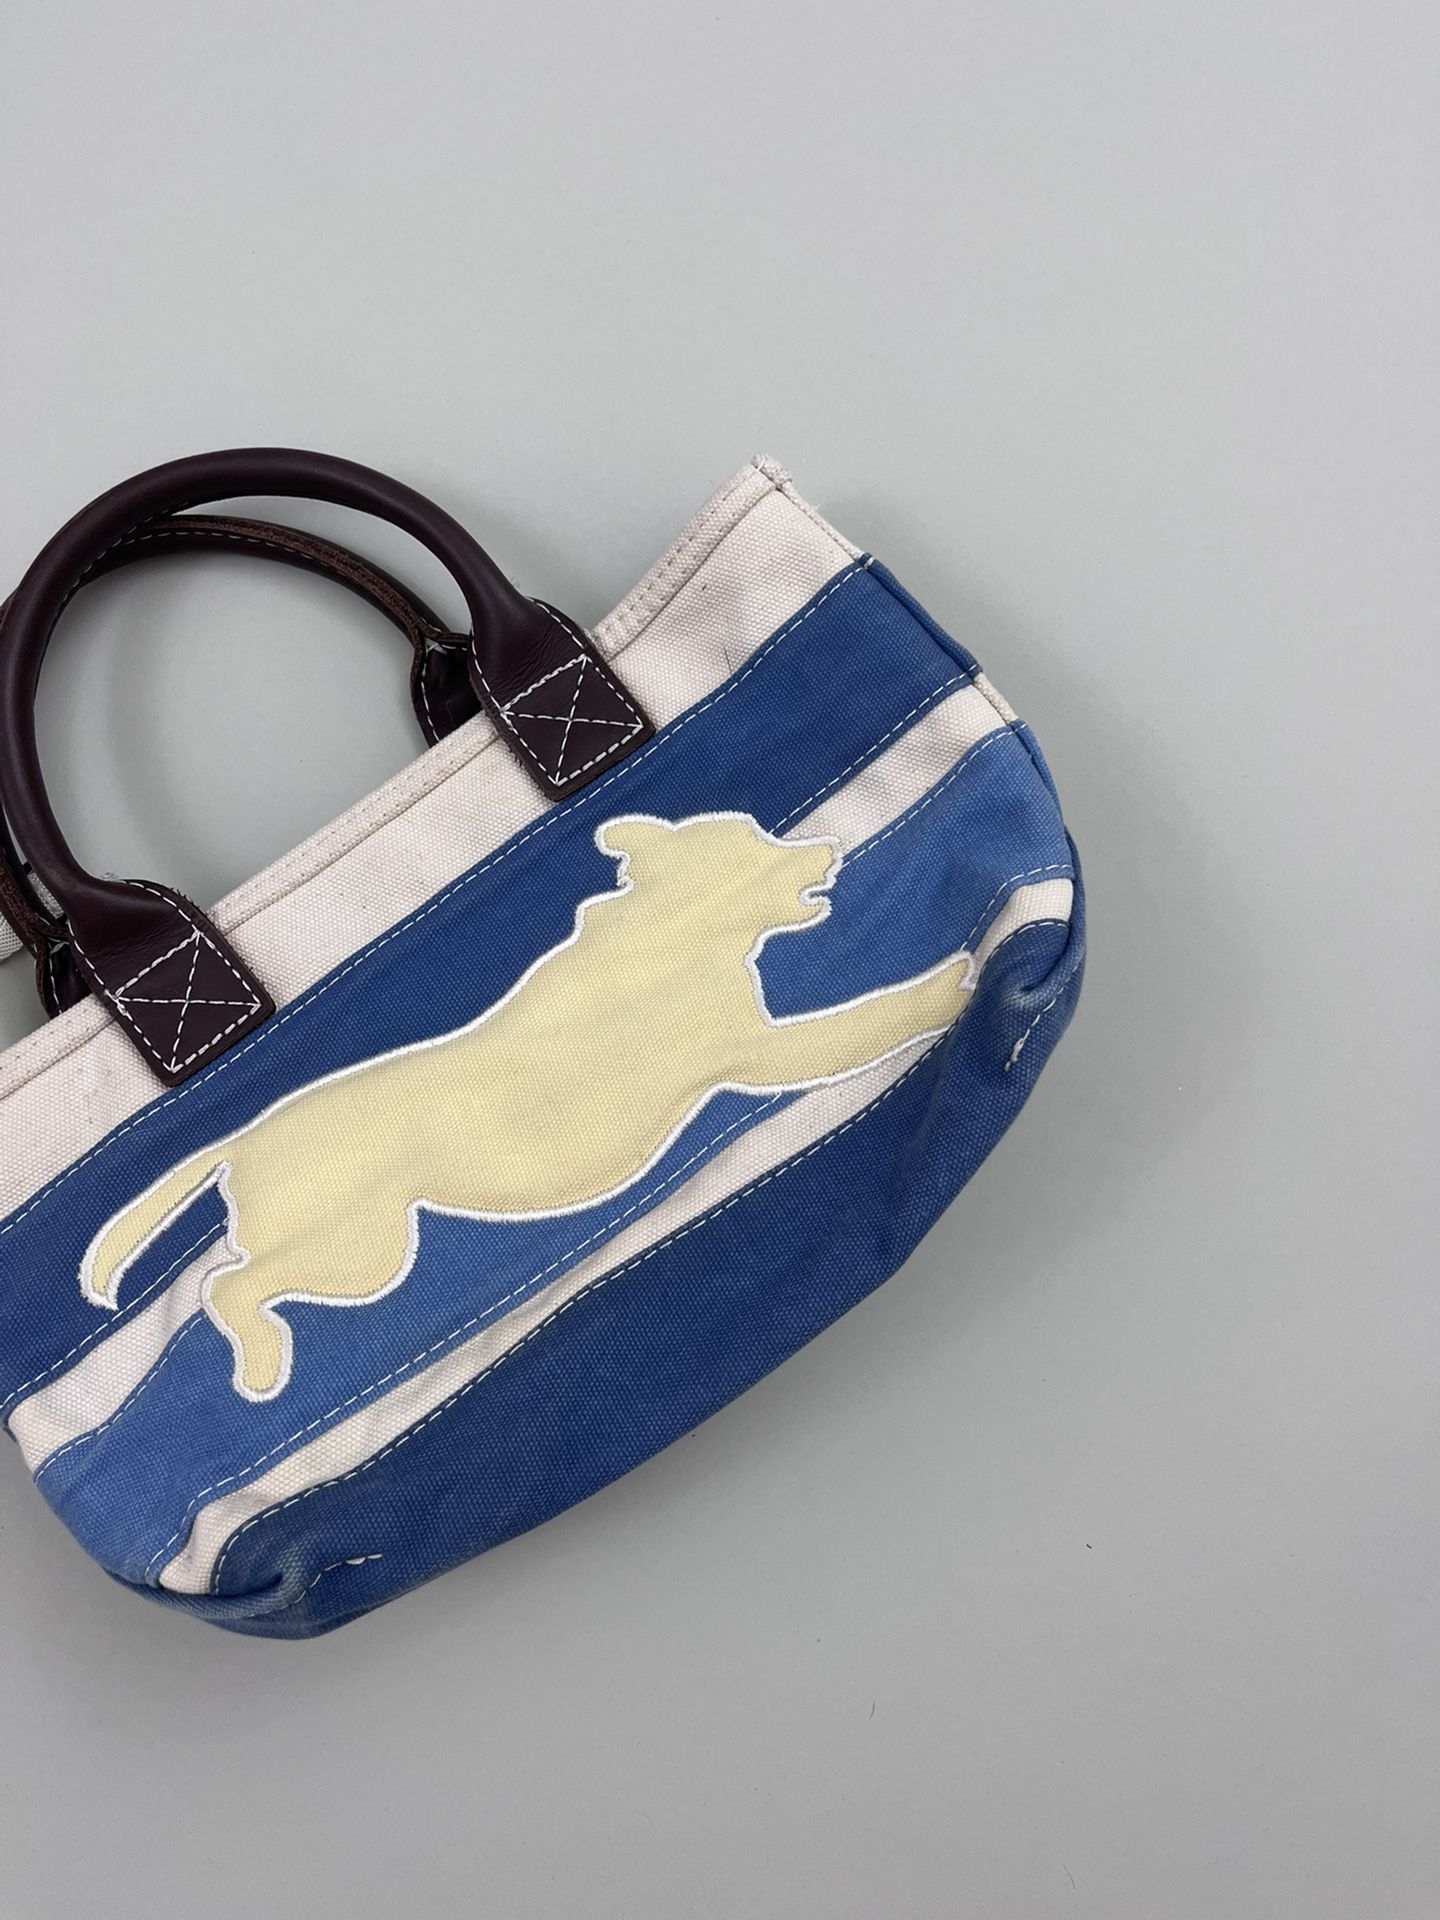 Rare Vintage LL Bean Boat & Tote Bag - Dog & Stripes with Leather Handles